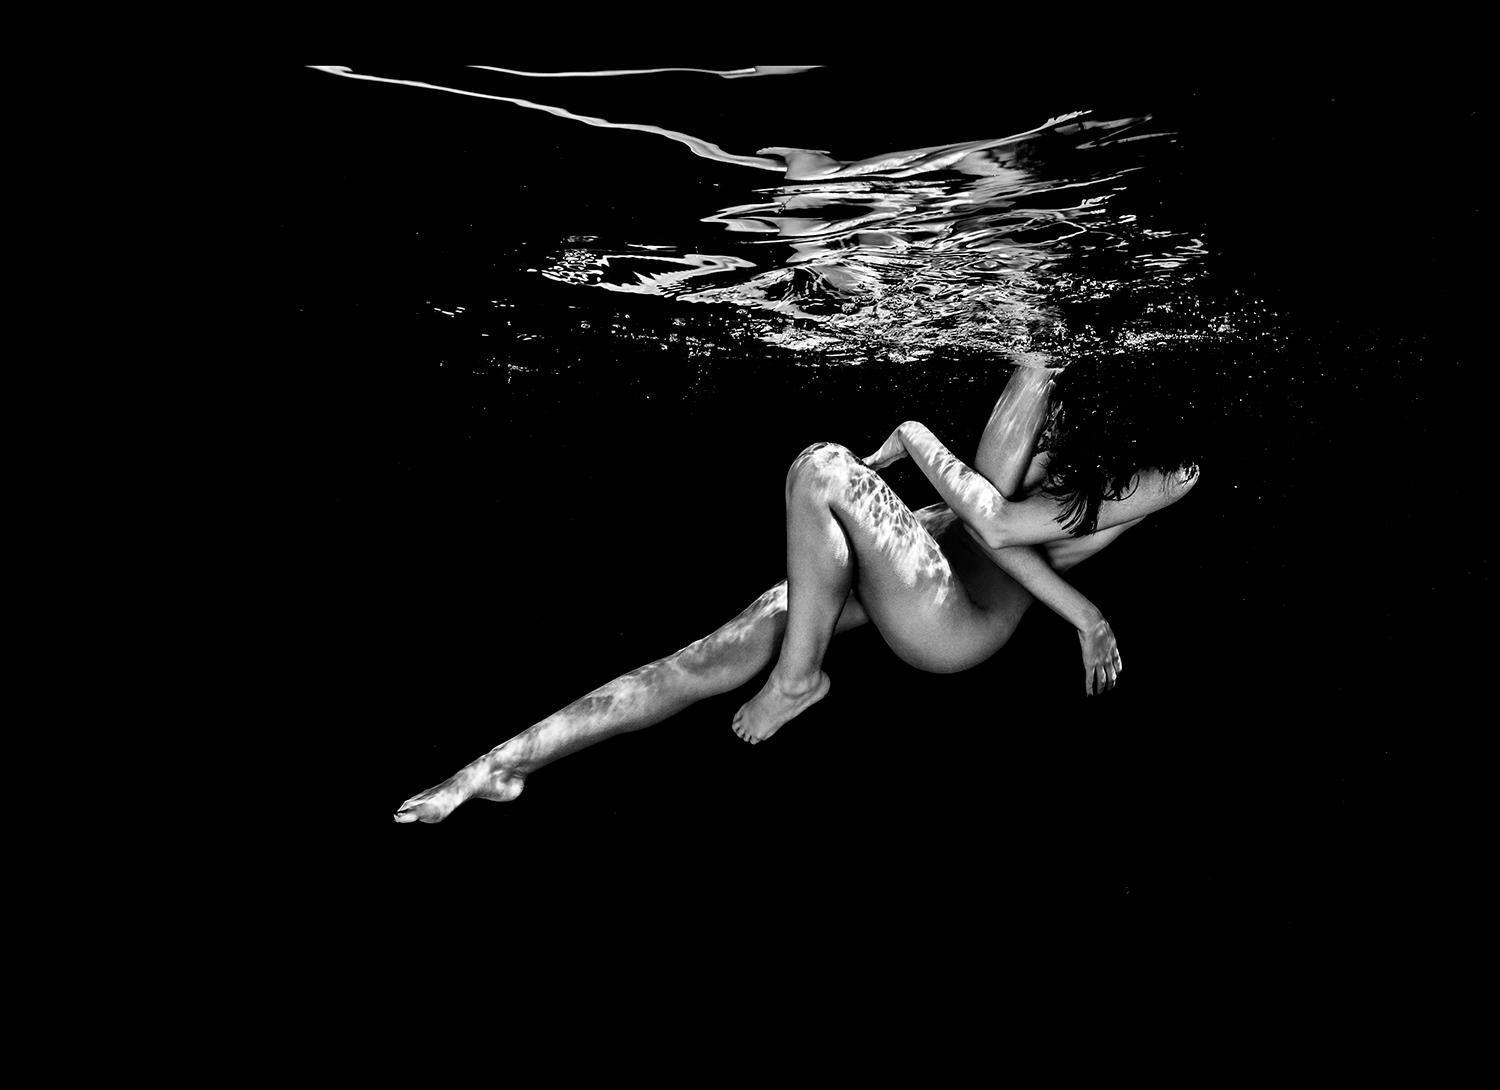 Alex Sher Nude Photograph - Night Flight - underwater black & white nude photograph - print on paper 23x32"